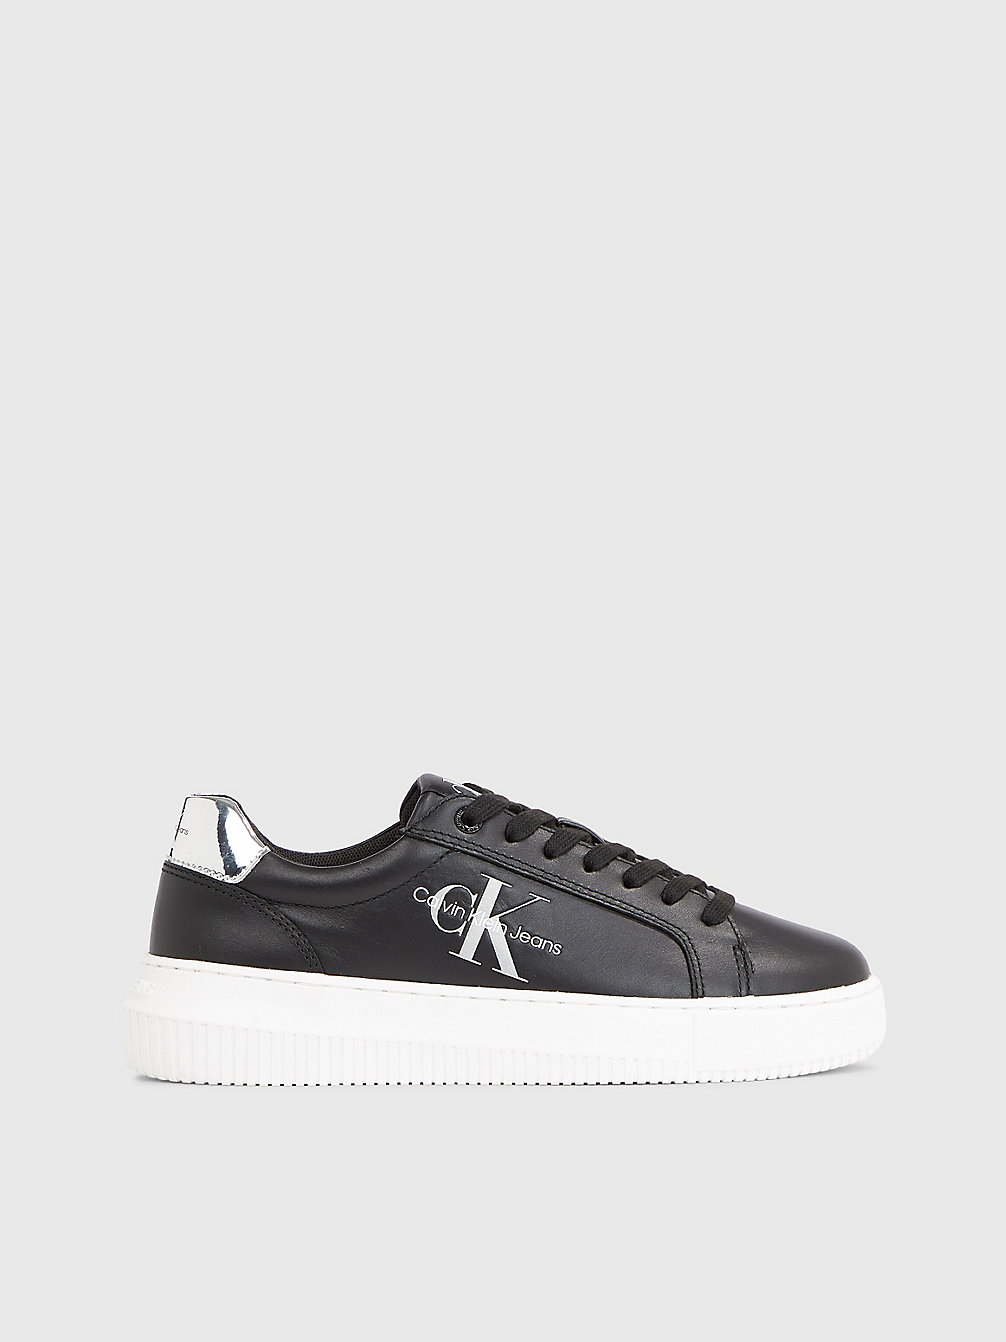 BLACK SILVER Leather Trainers undefined women Calvin Klein